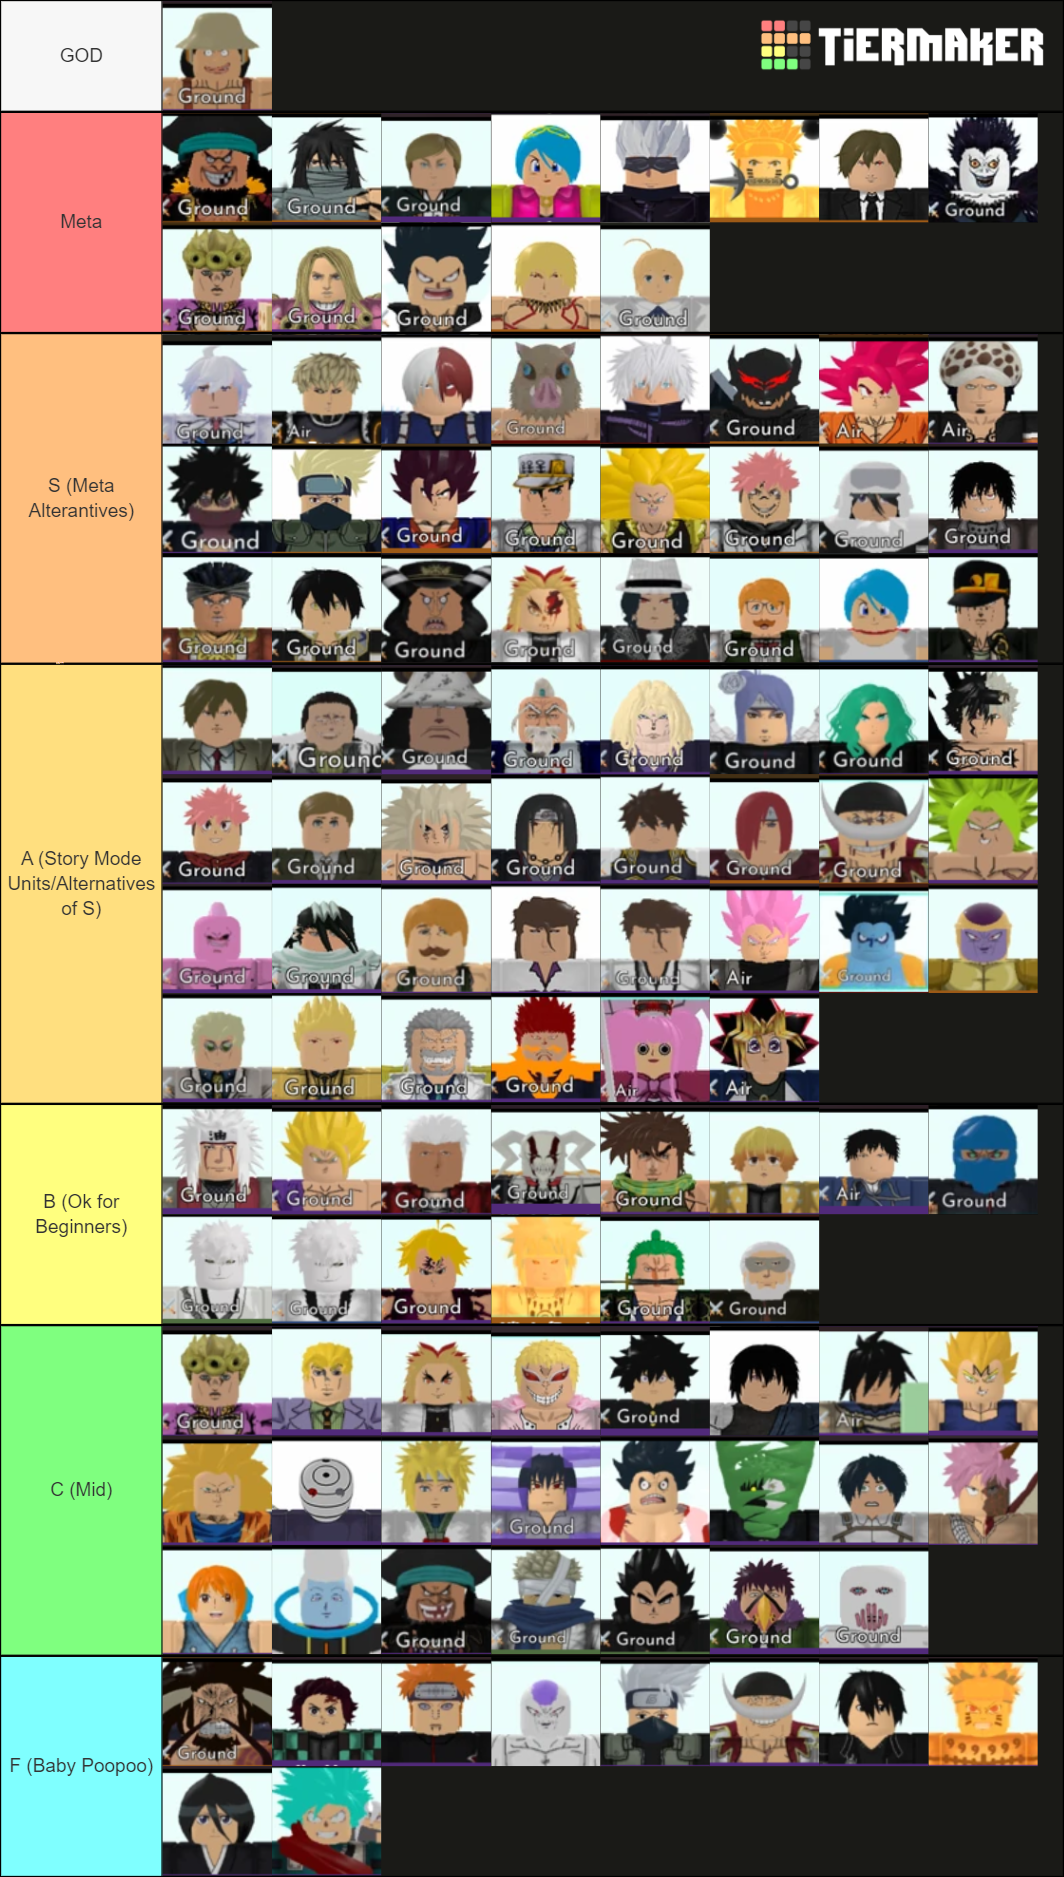 UPDATED] STORY MODE TIER LIST in All Star Tower Defense